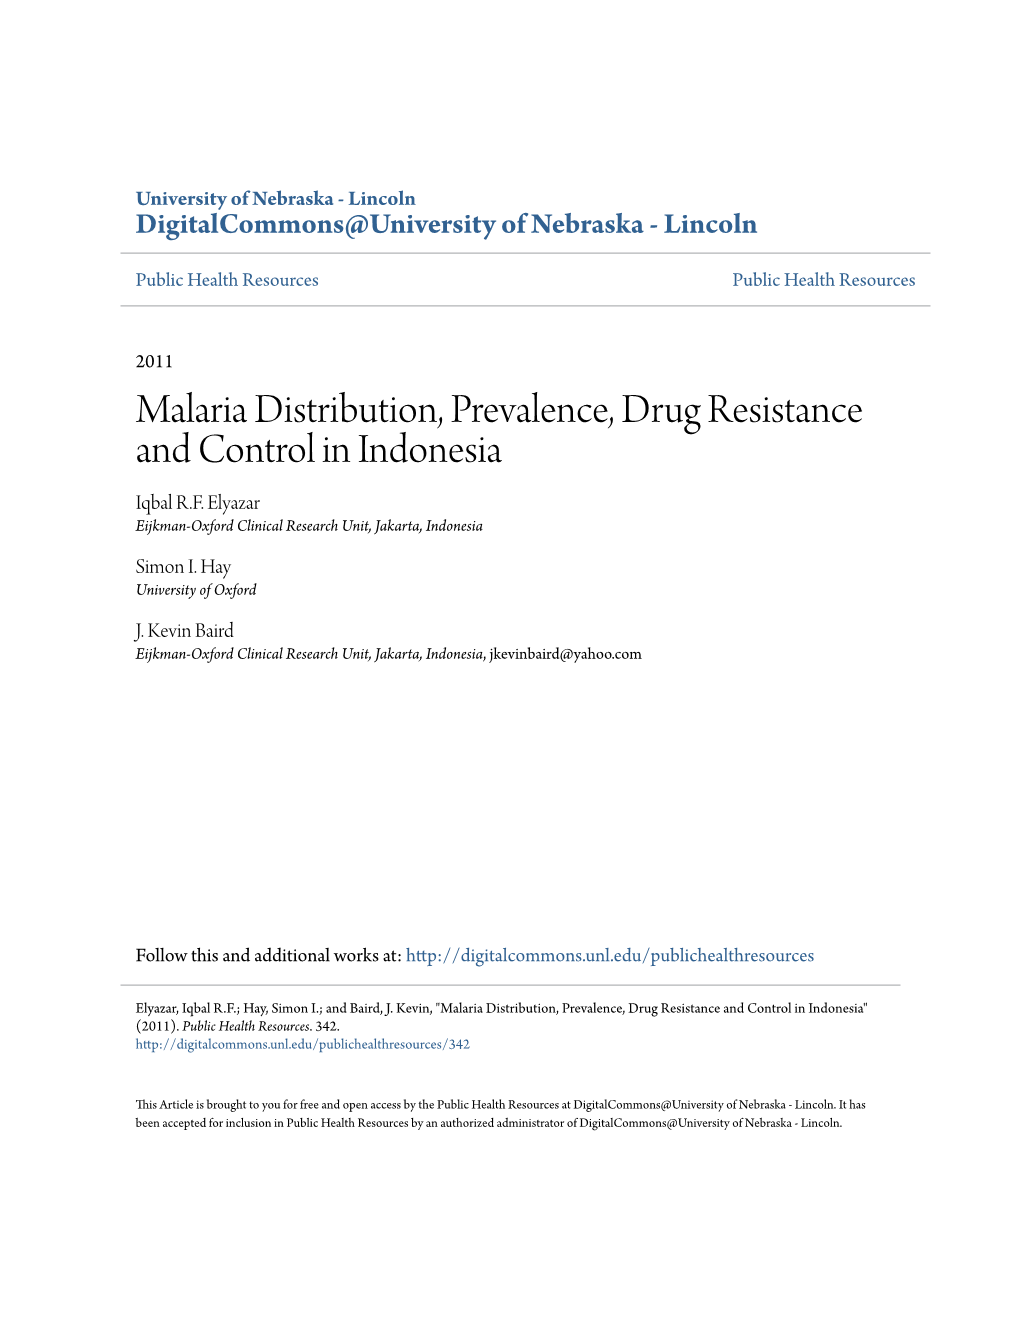 Malaria Distribution, Prevalence, Drug Resistance and Control in Indonesia Iqbal R.F